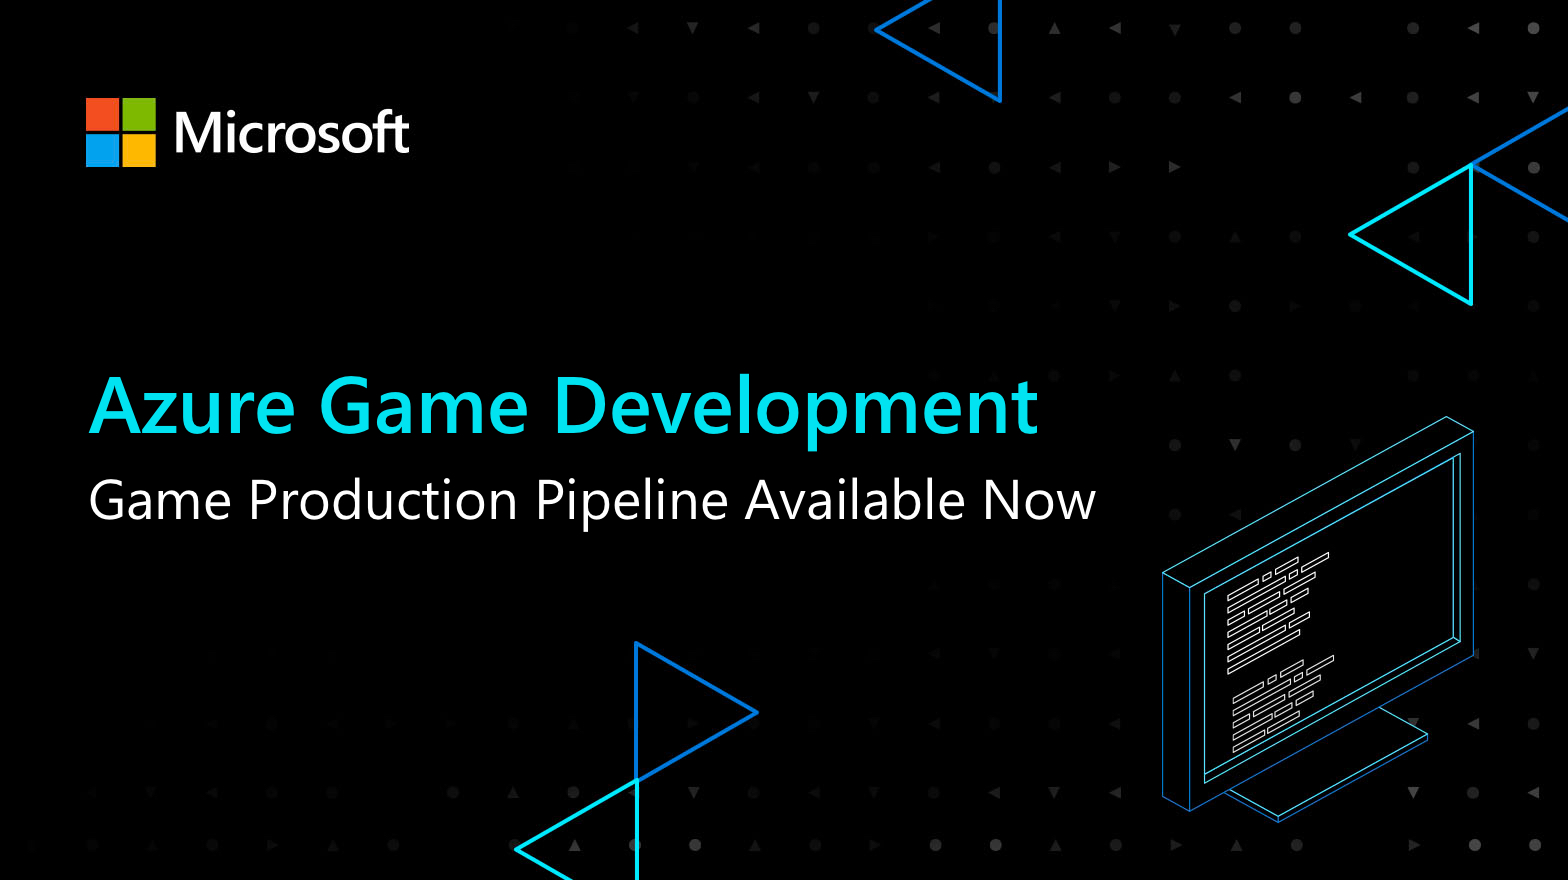 Azure Game Development game production pipeline available now